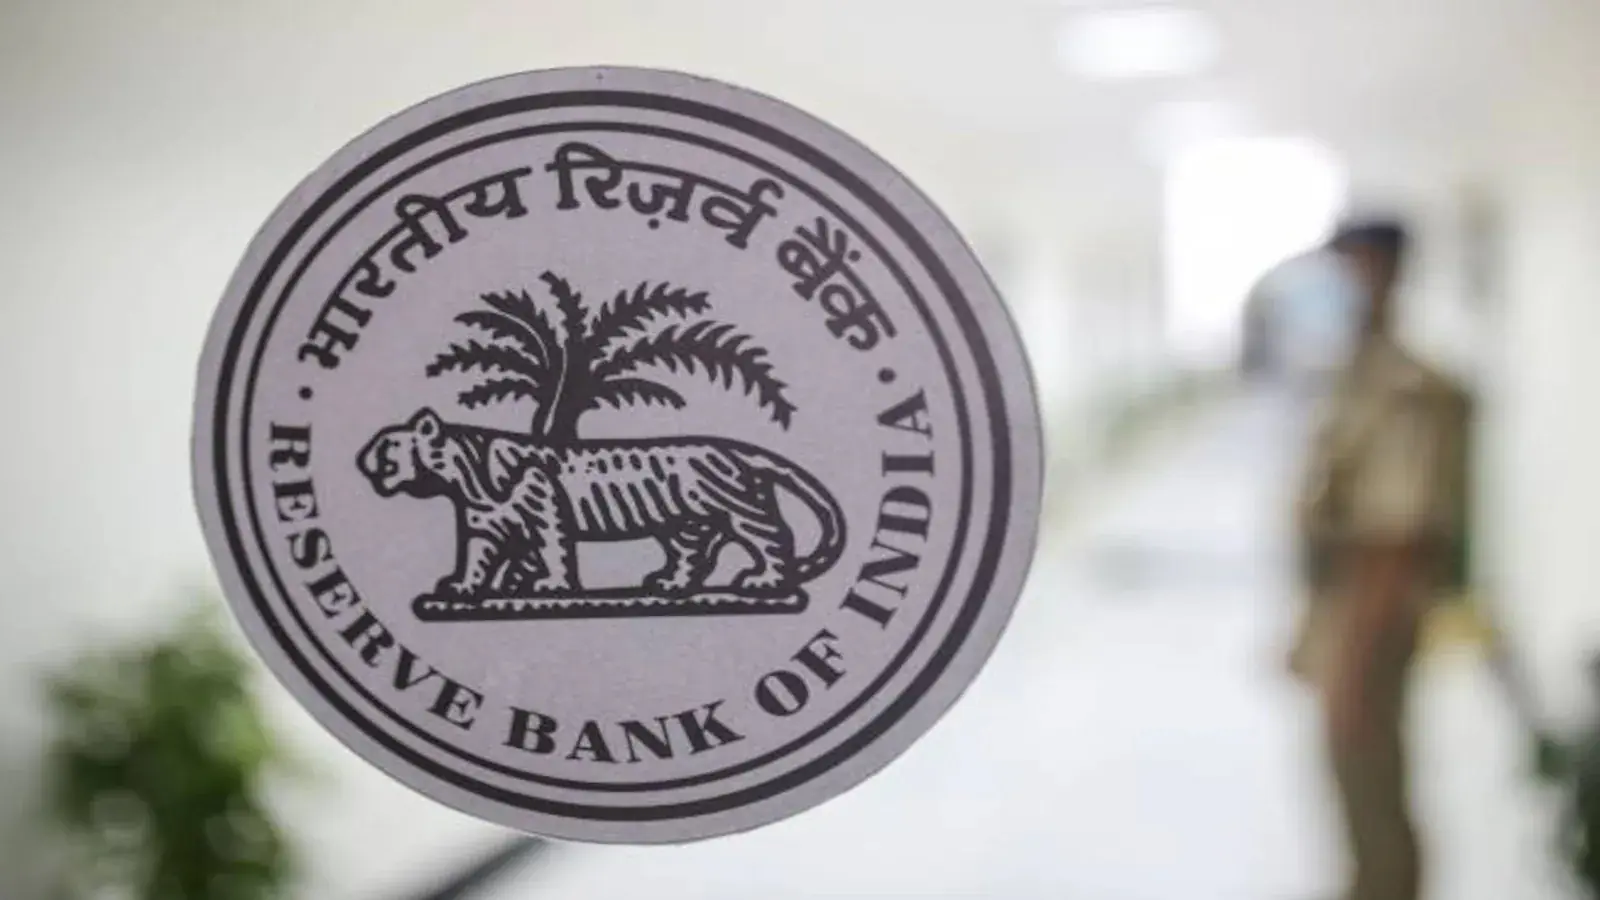 RBI rejected the application of these two companies, they had applied to open a small finance bank